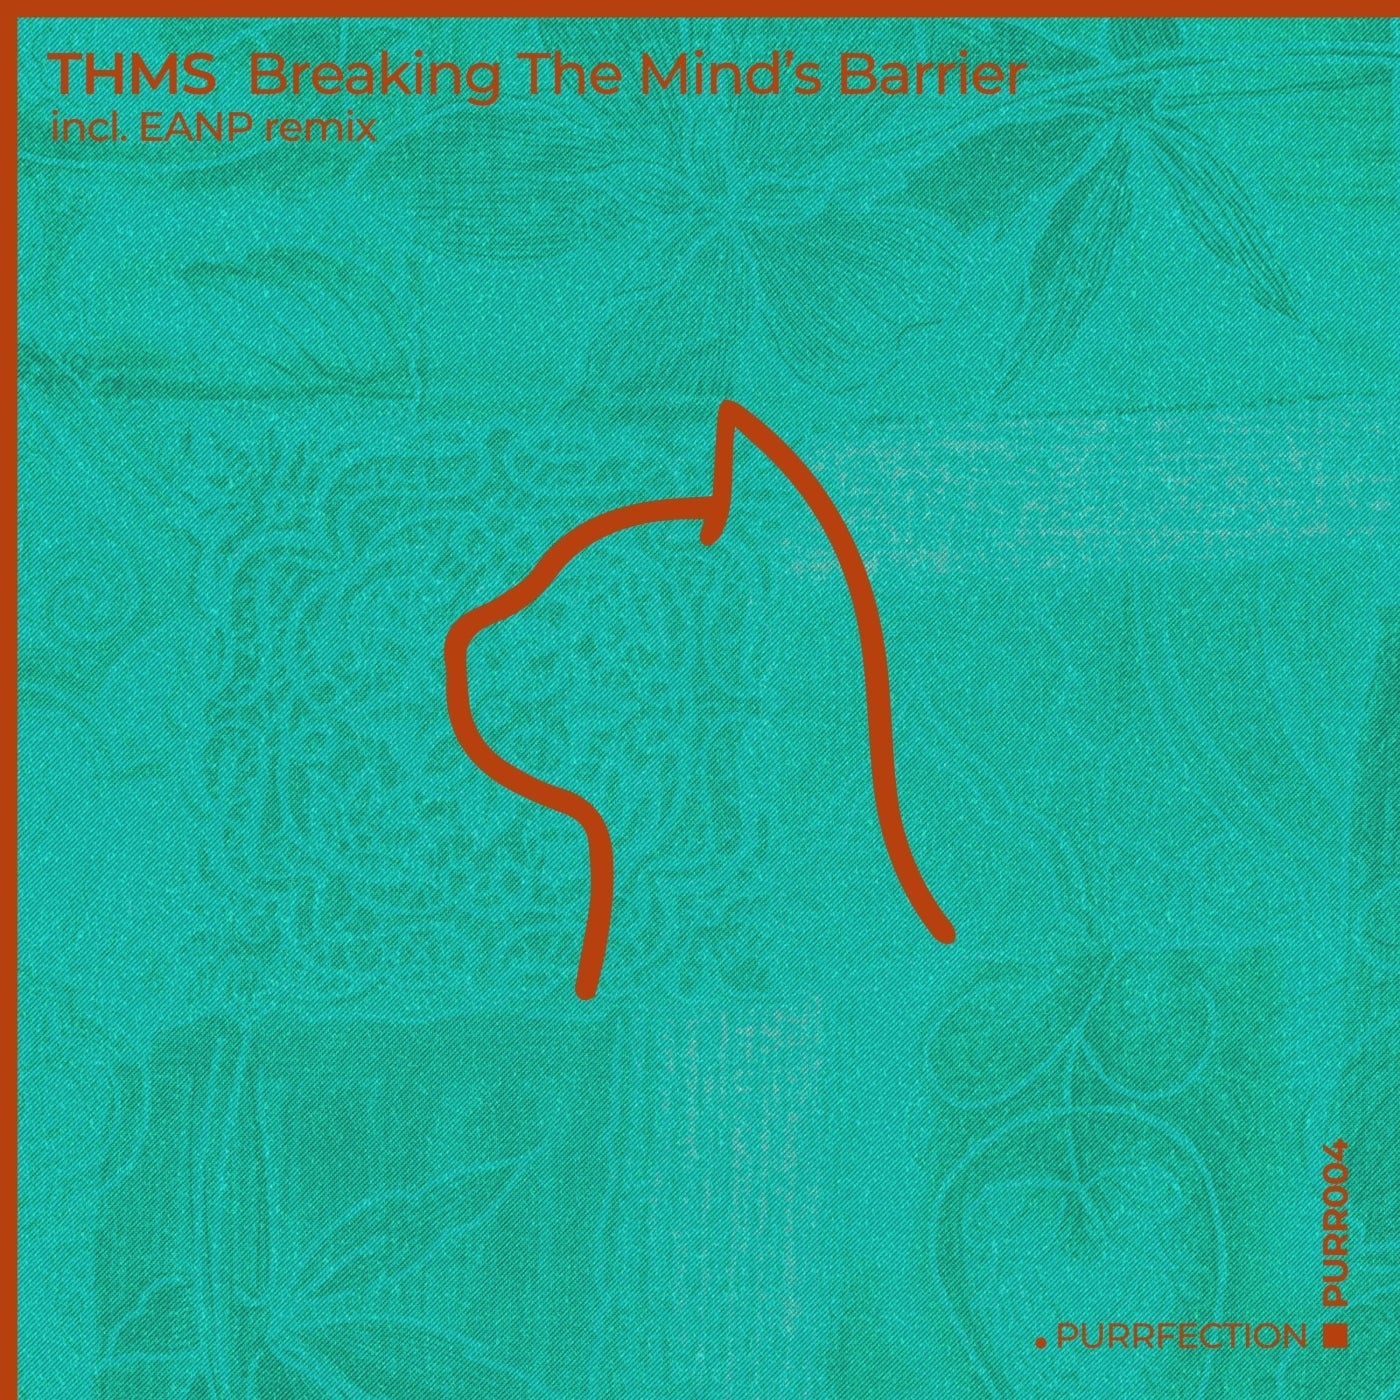 Cover - THMS (US) - Breaking the Mind's Barrier (Original Mix)